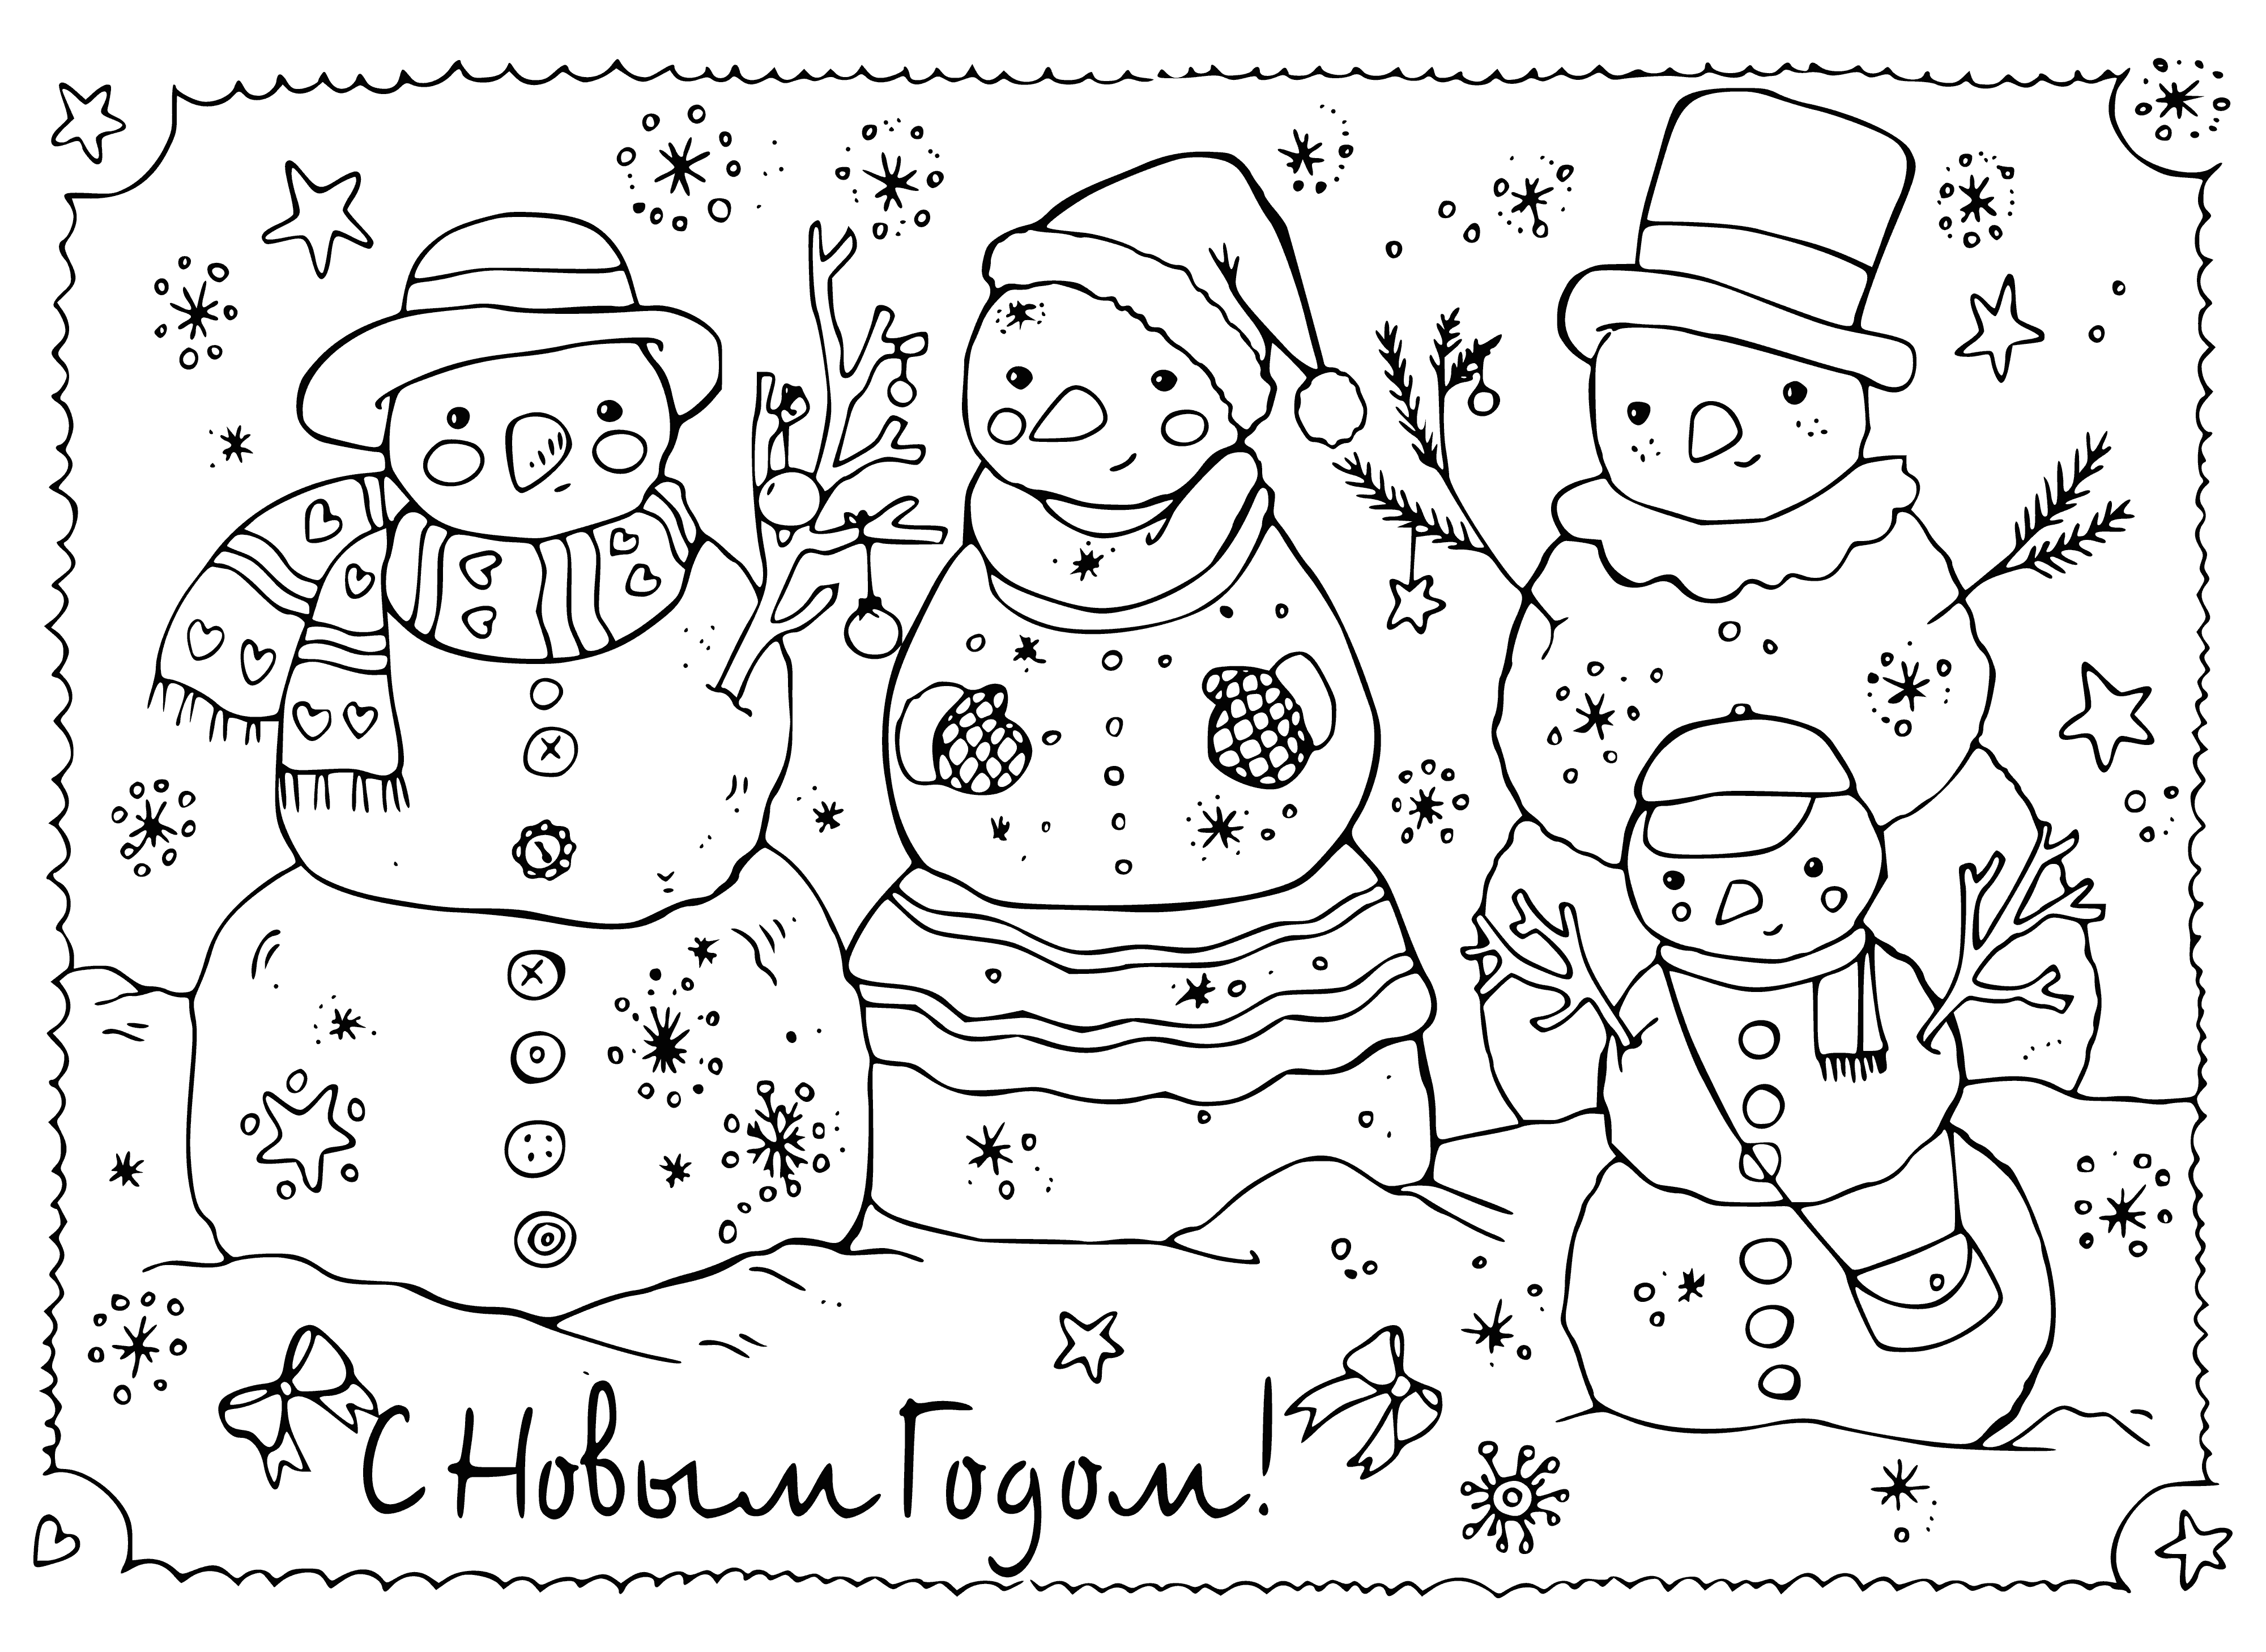 coloring page: 3 snowmen in coloring page - small, medium, large. All wearing hats & scarves. Small has carrot nose, medium button & large pipe. All in snow.